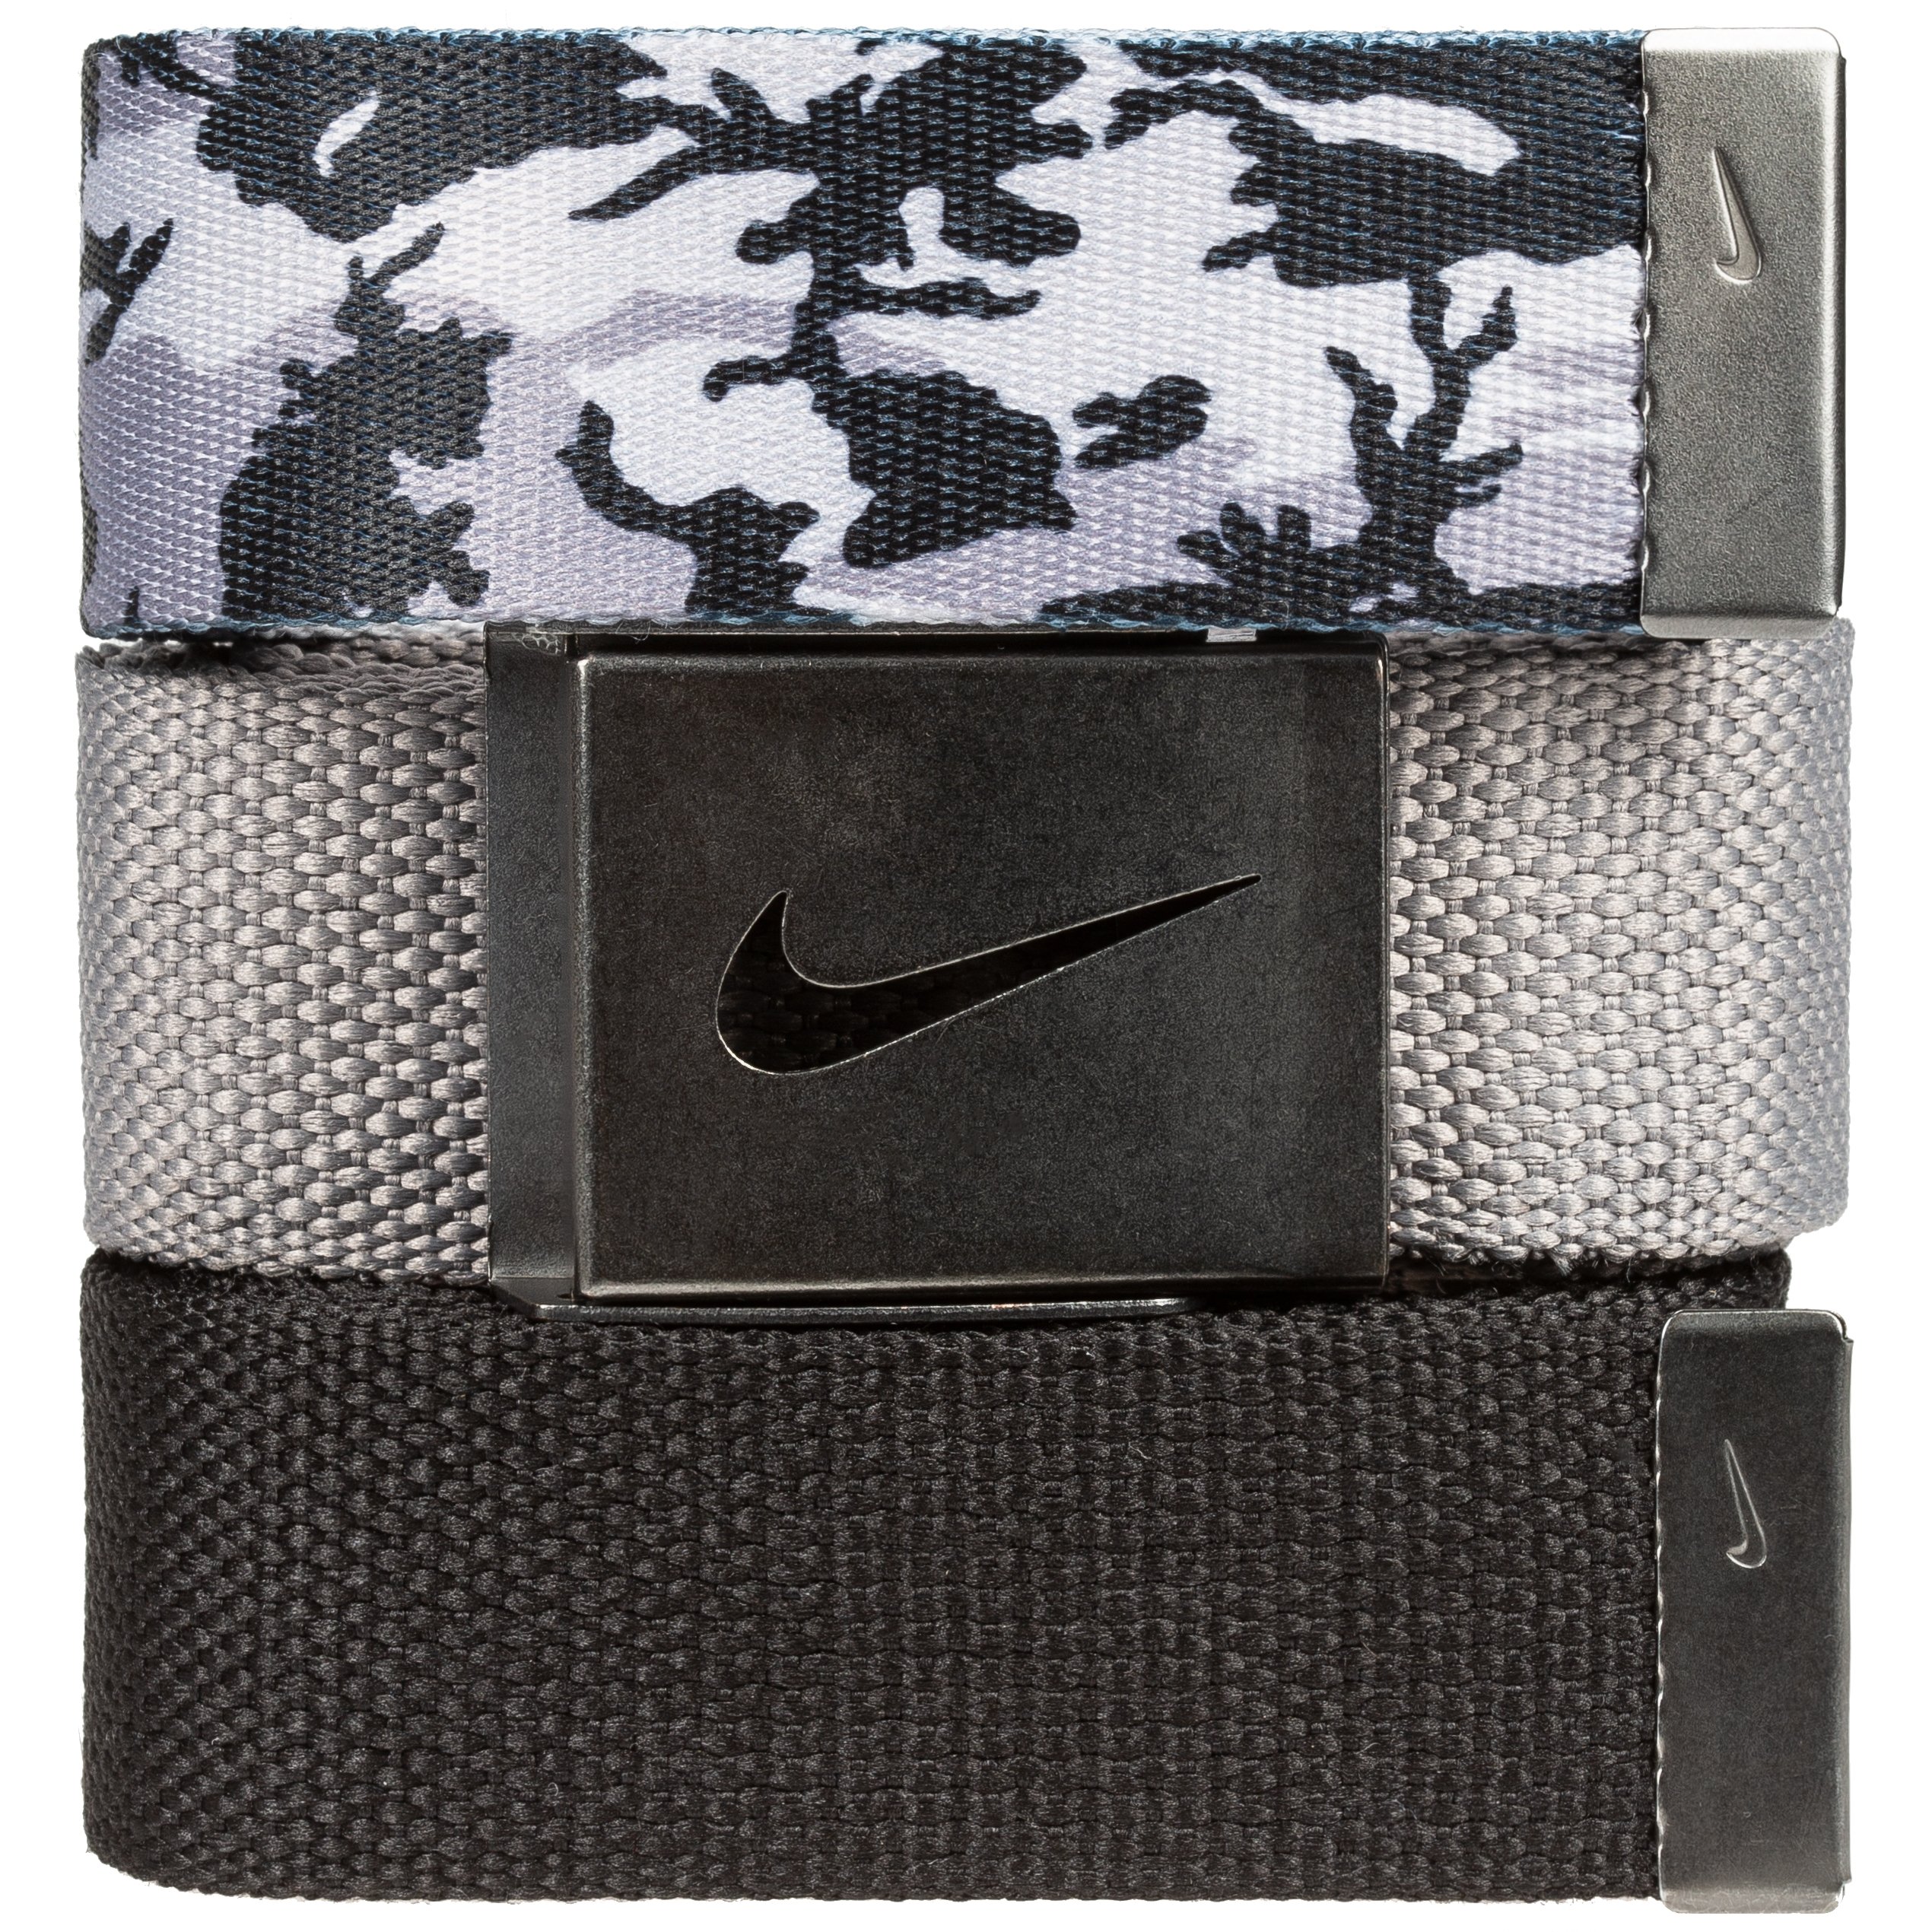 Nike Golf Men's 3 in 1 Web Pack Belts, One Size Fits Most - Select Colors!  | eBay